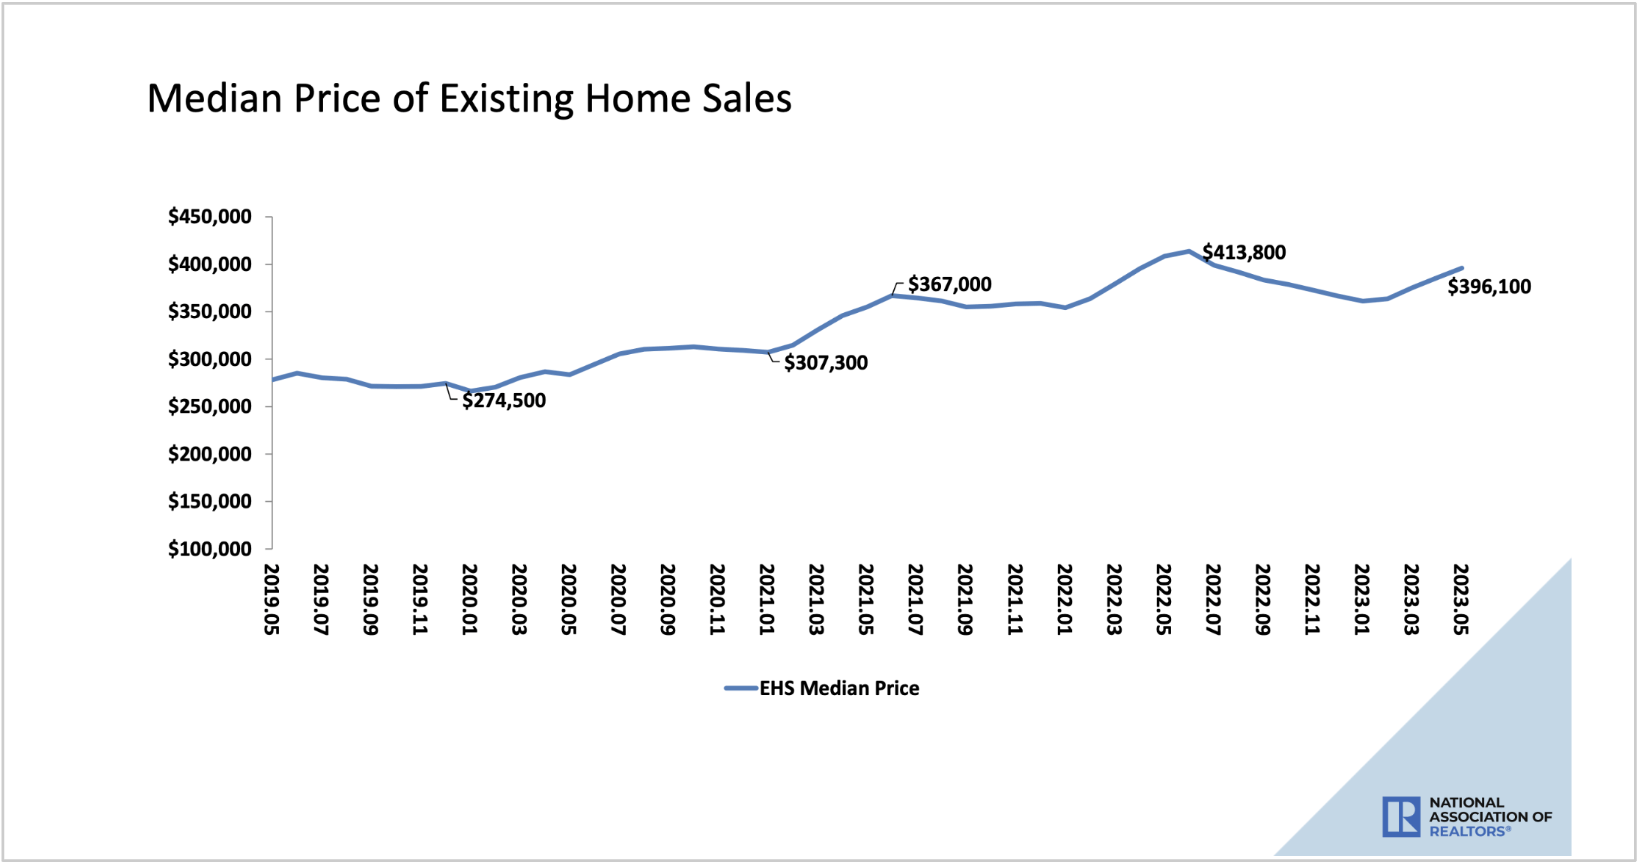 Existing home prices down 18k from June 2022 peak to 396,100. Is this